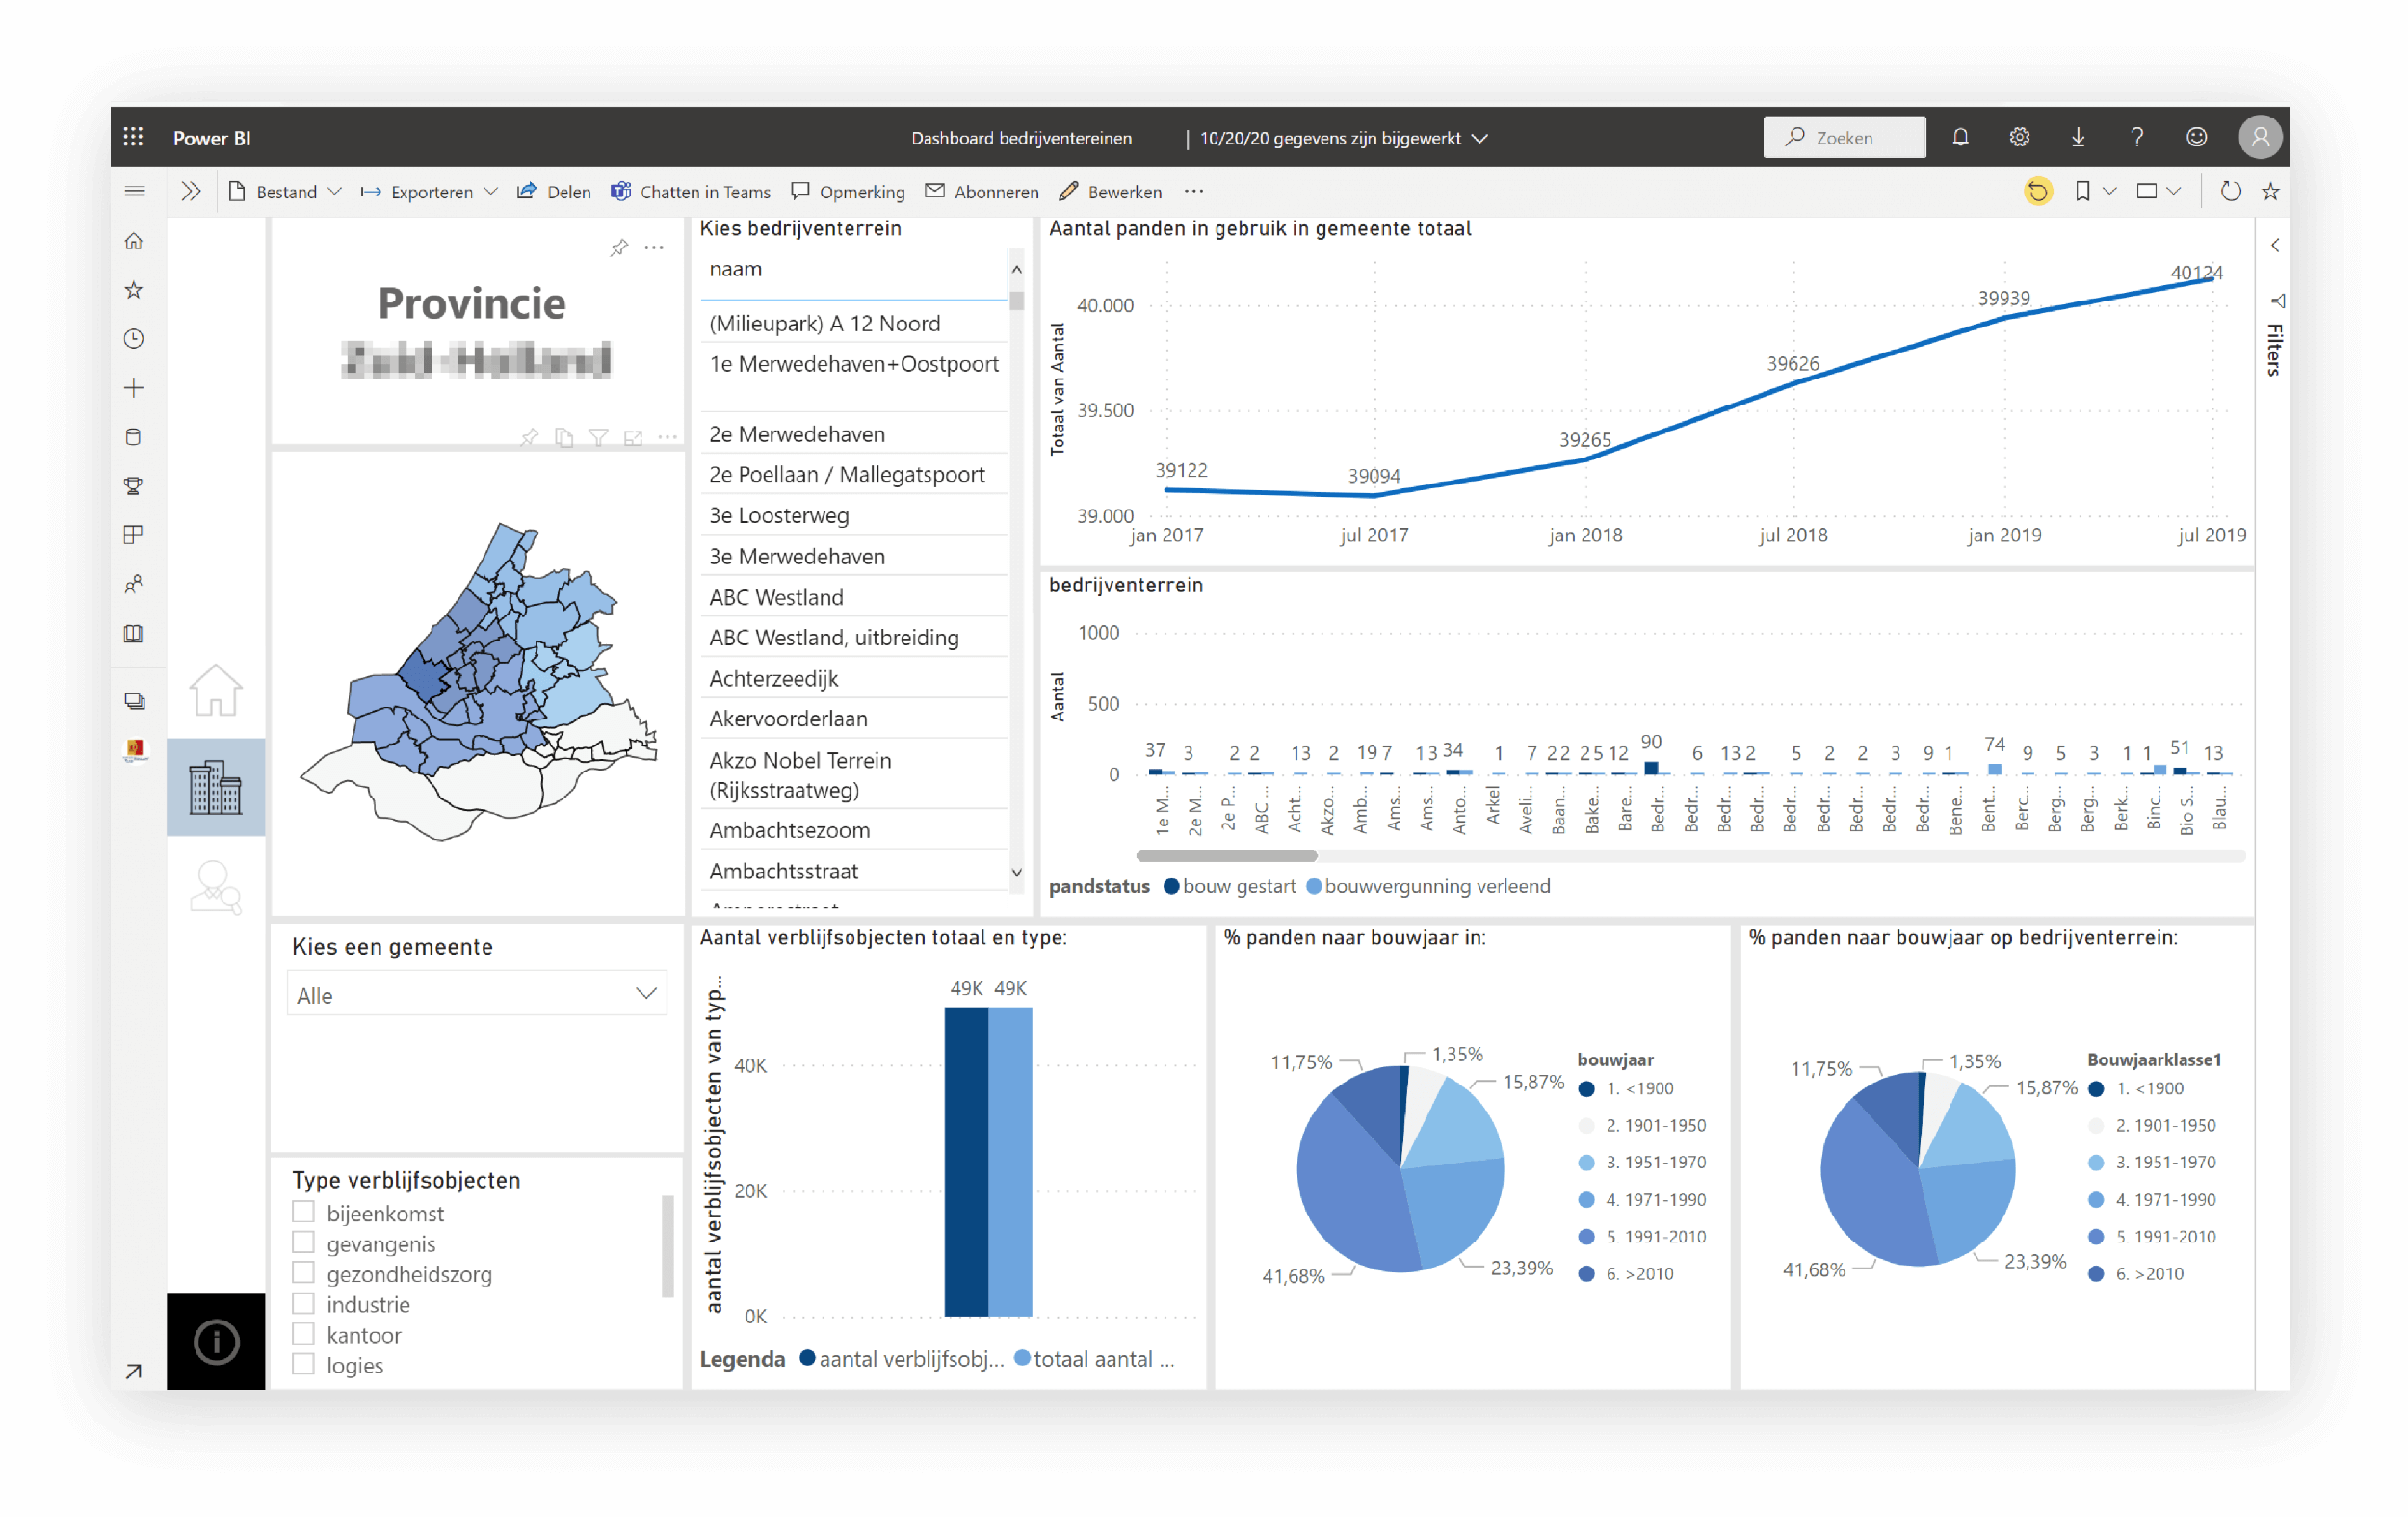 Example of a dashboard developed for a province